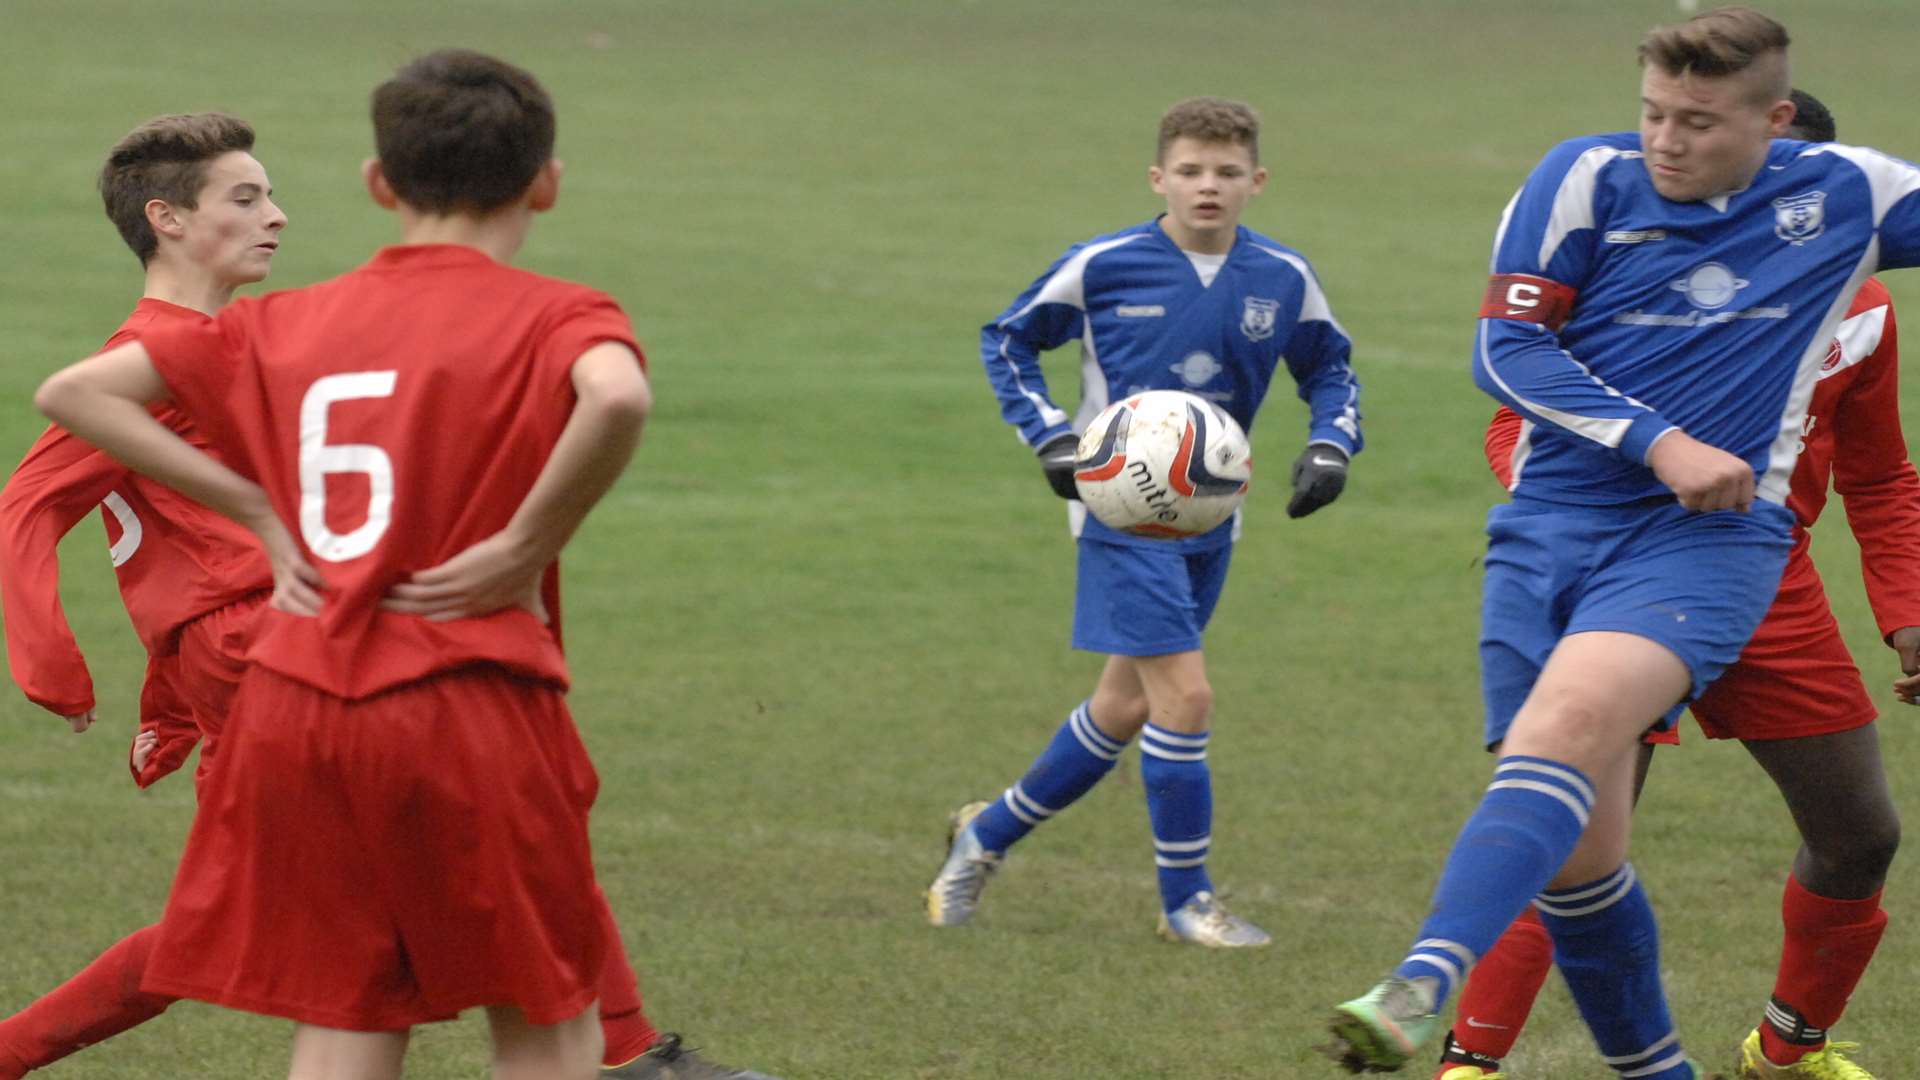 New Road's under-15s, in blue, go for goal against Hempstead Valley in Division 1 Picture: Chris Davey